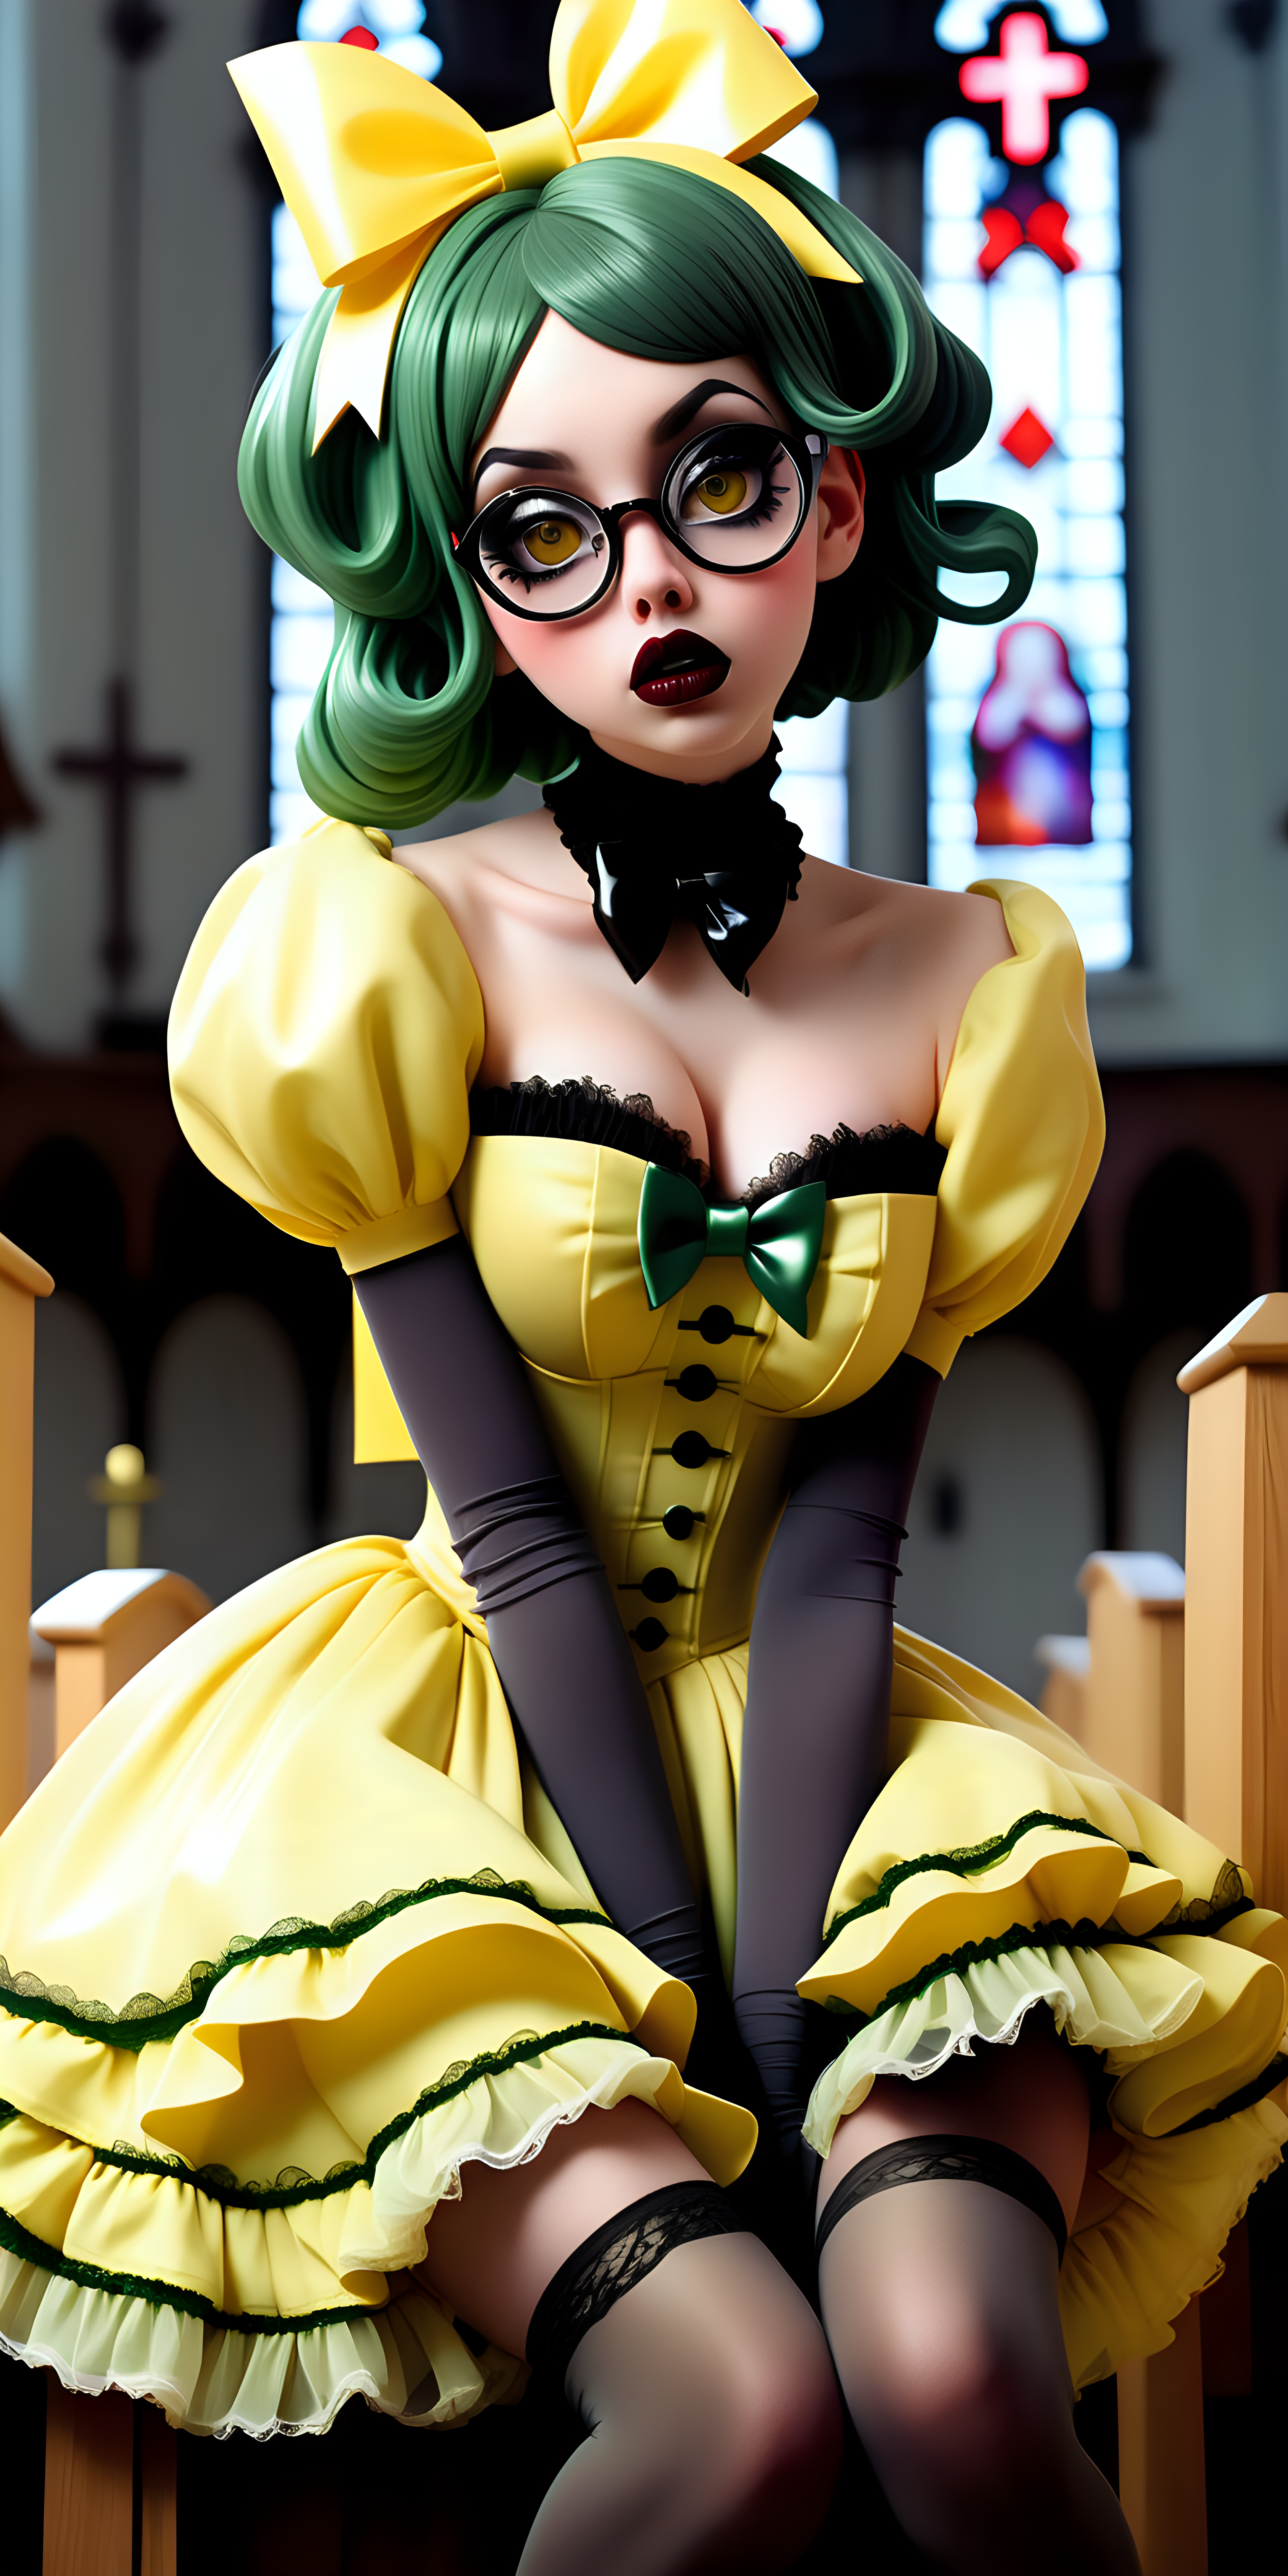 Anime woman with dark green hair and large lips with glossy dark brown lipstick and heavy makeup wearing a frilly yellow ball gown, black stockings, glossy yellow heeled mary jane shoes, lots of bows and lace, wearing glasses. Nervous expression. Sitting nervously in an empty church